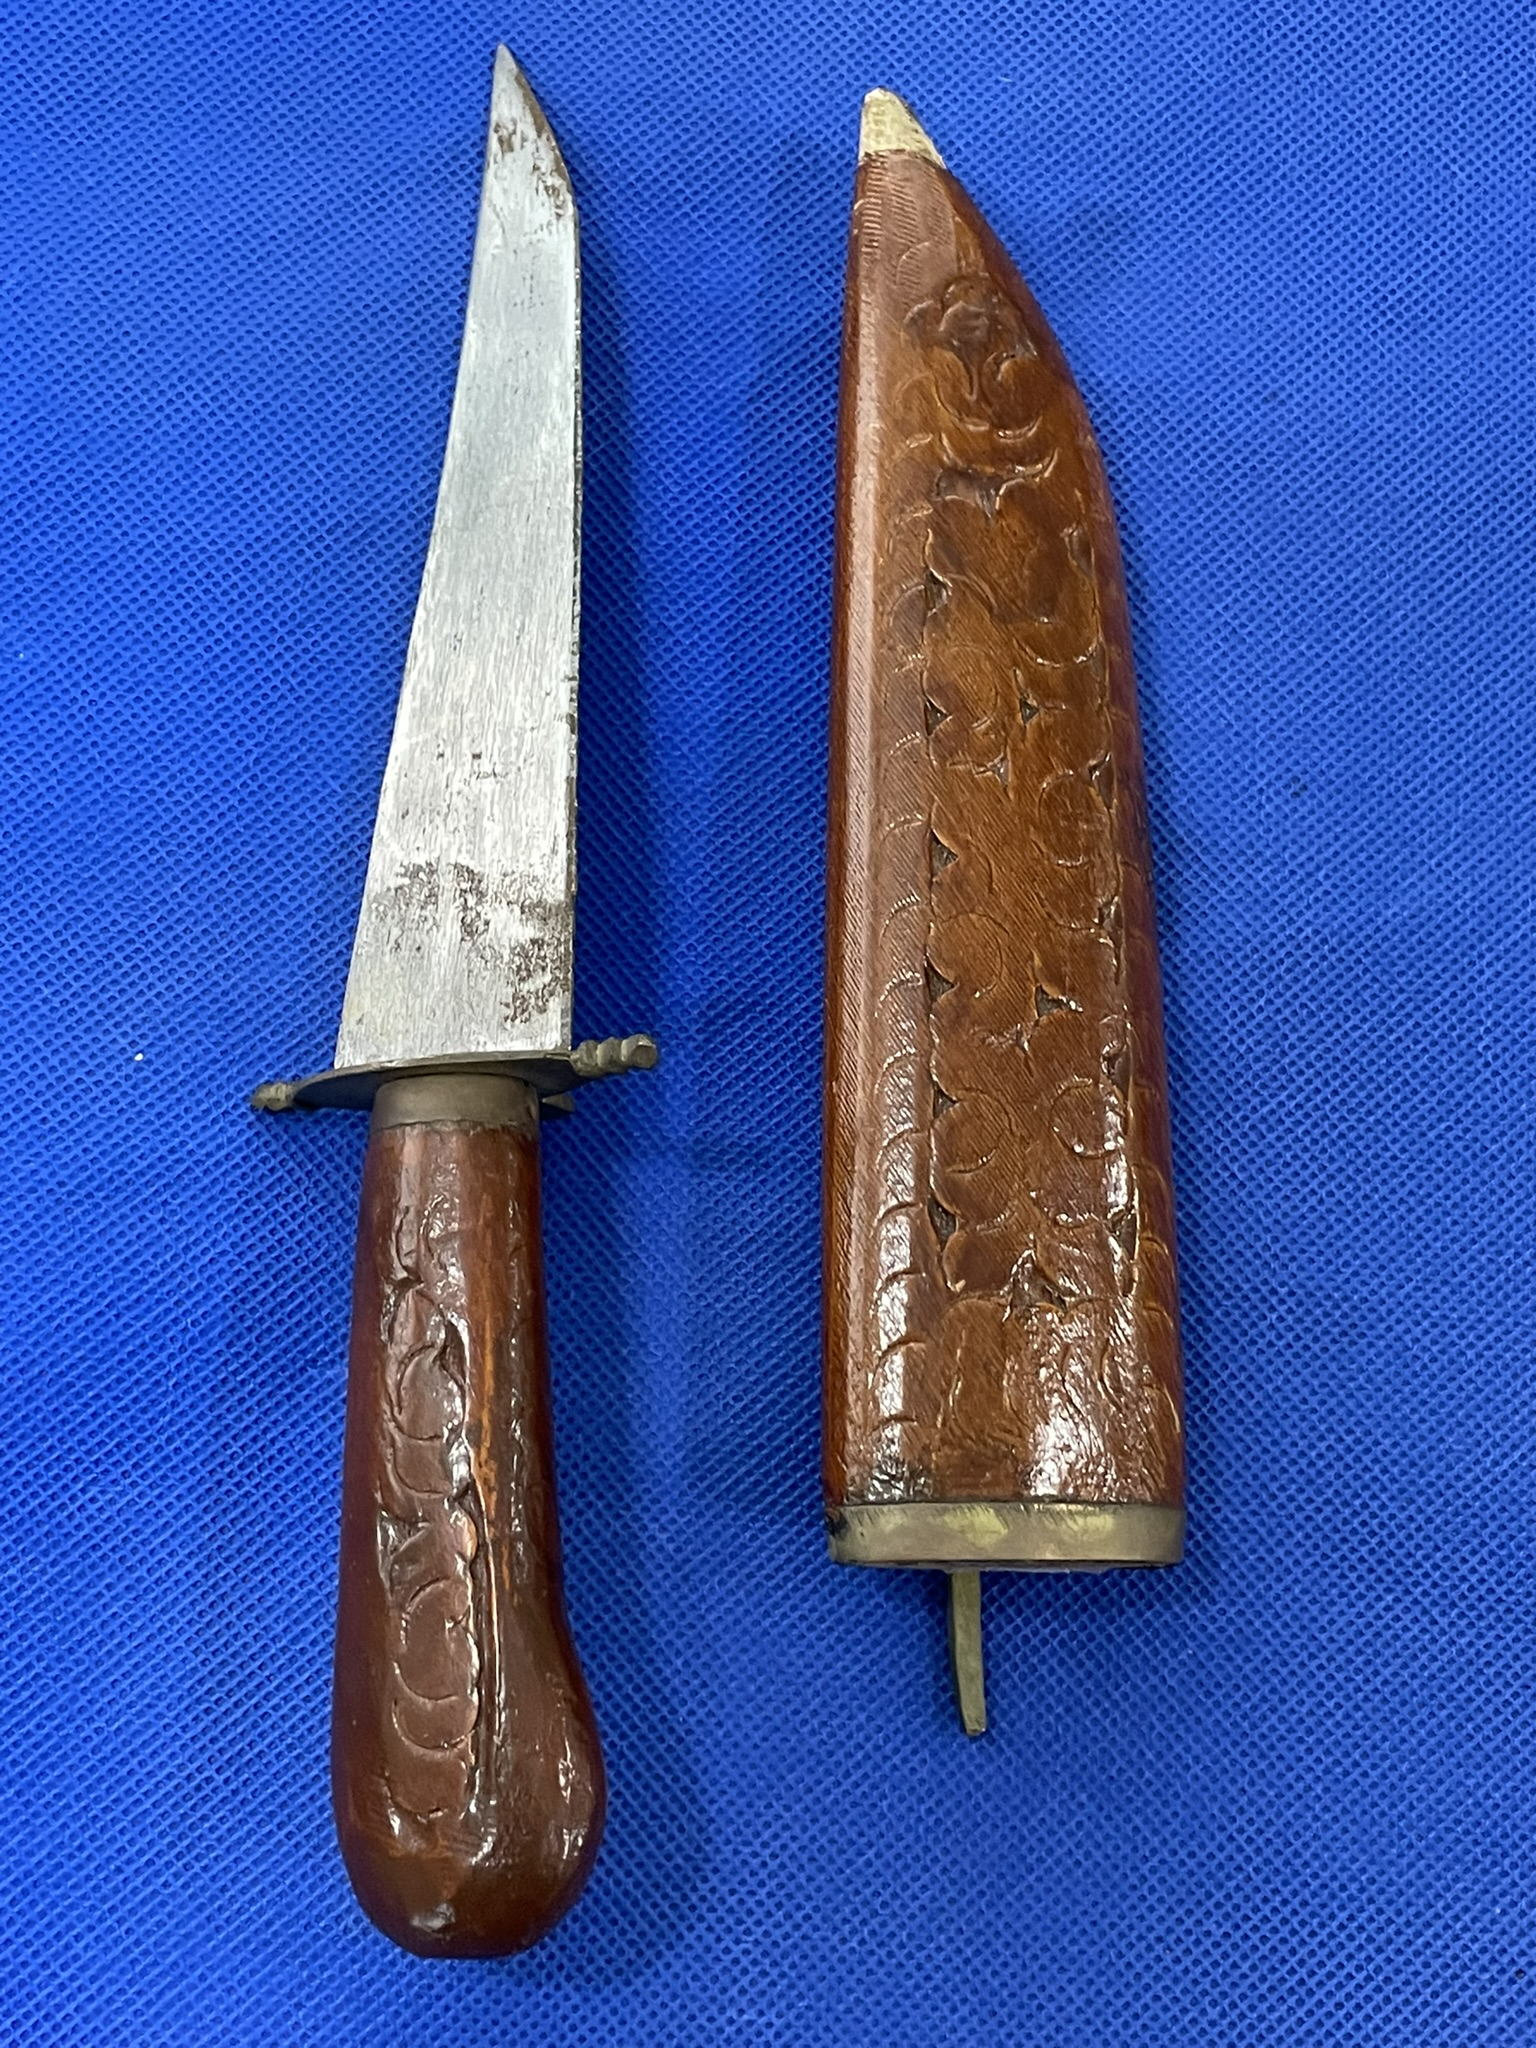 Large knife with wood handle